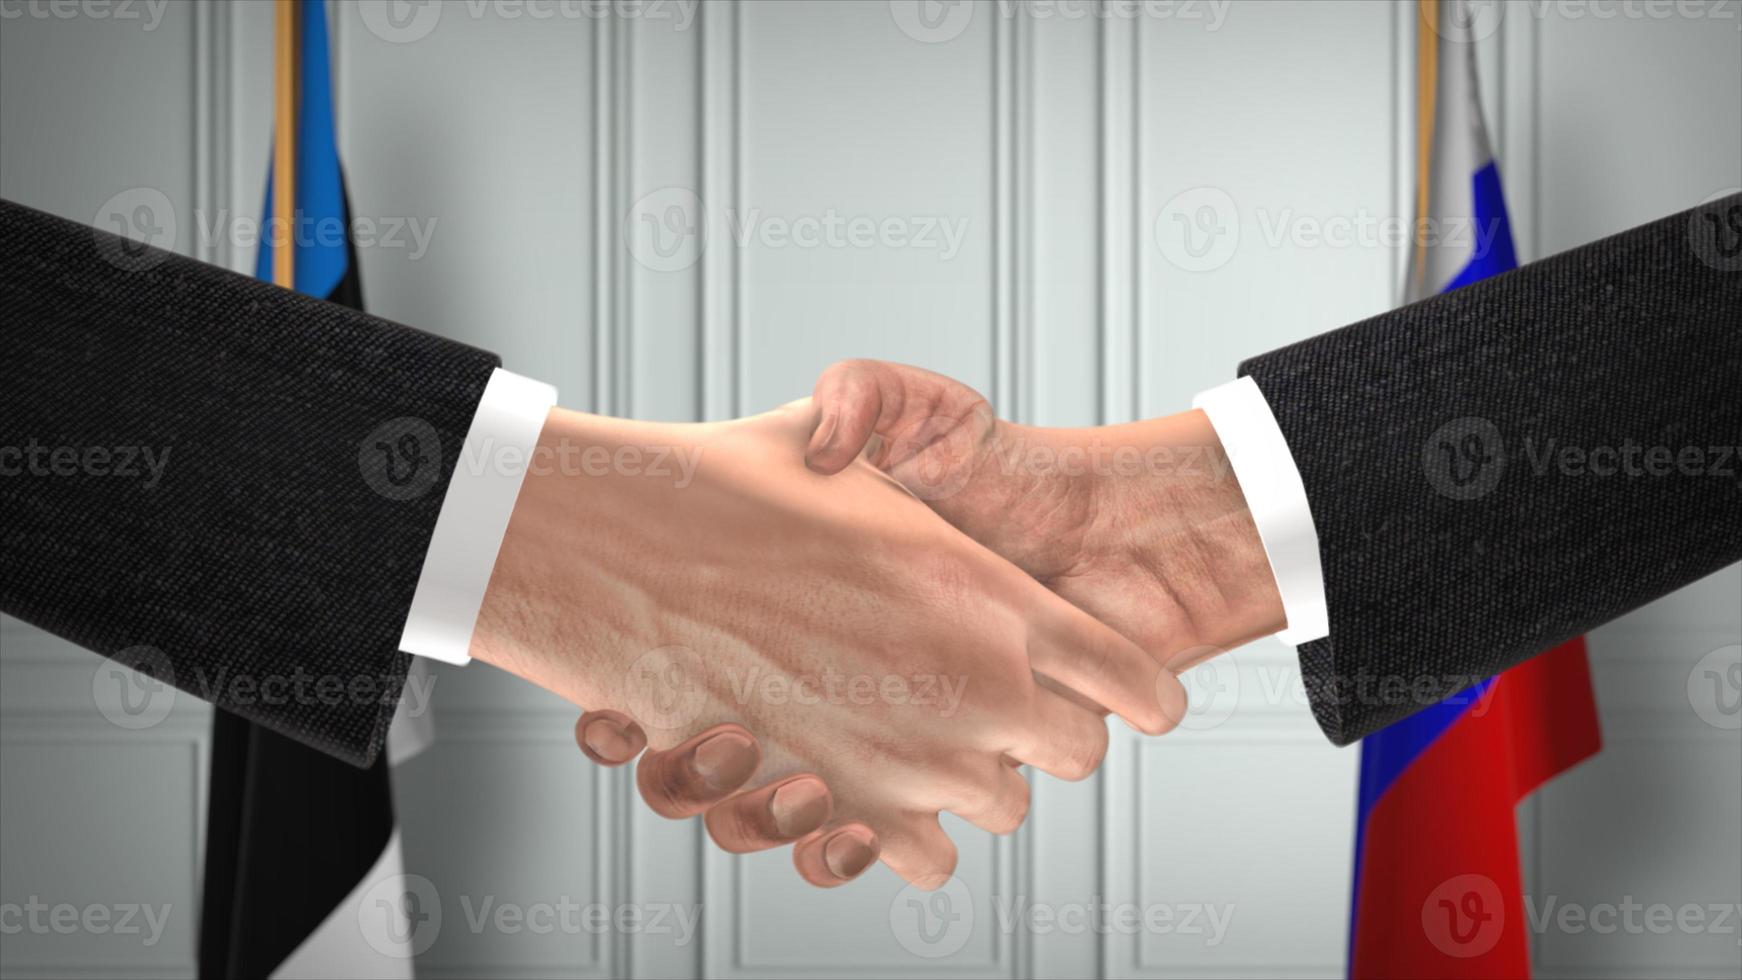 Estonia and Russia deal handshake, politics 3D illustration. Official meeting or cooperation, business meet. Businessmen or politicians shake hands photo